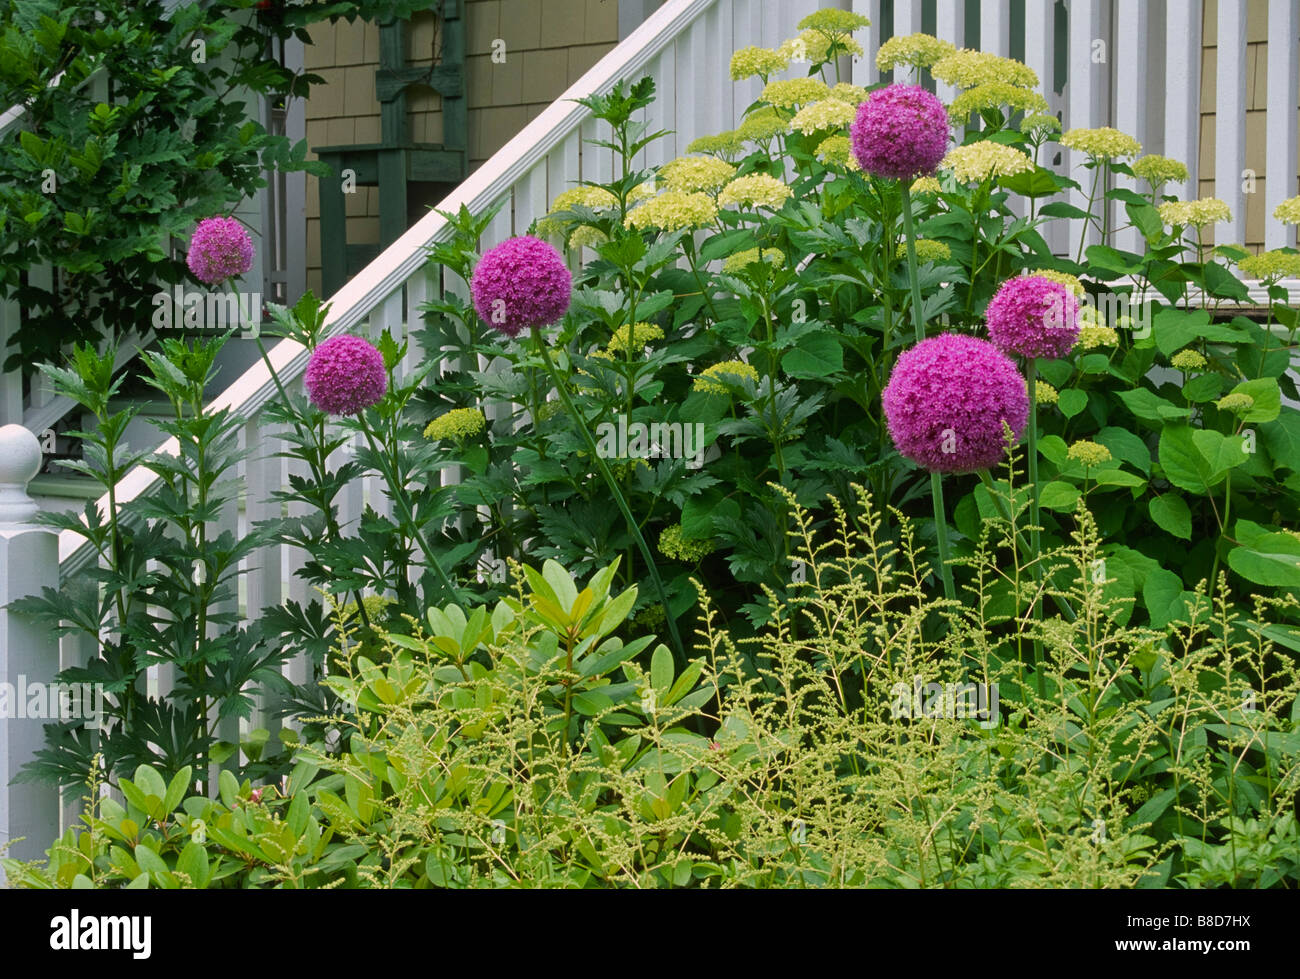 Giant ornamental onions soar above other plants in this dooryard garden in early June. Stock Photo